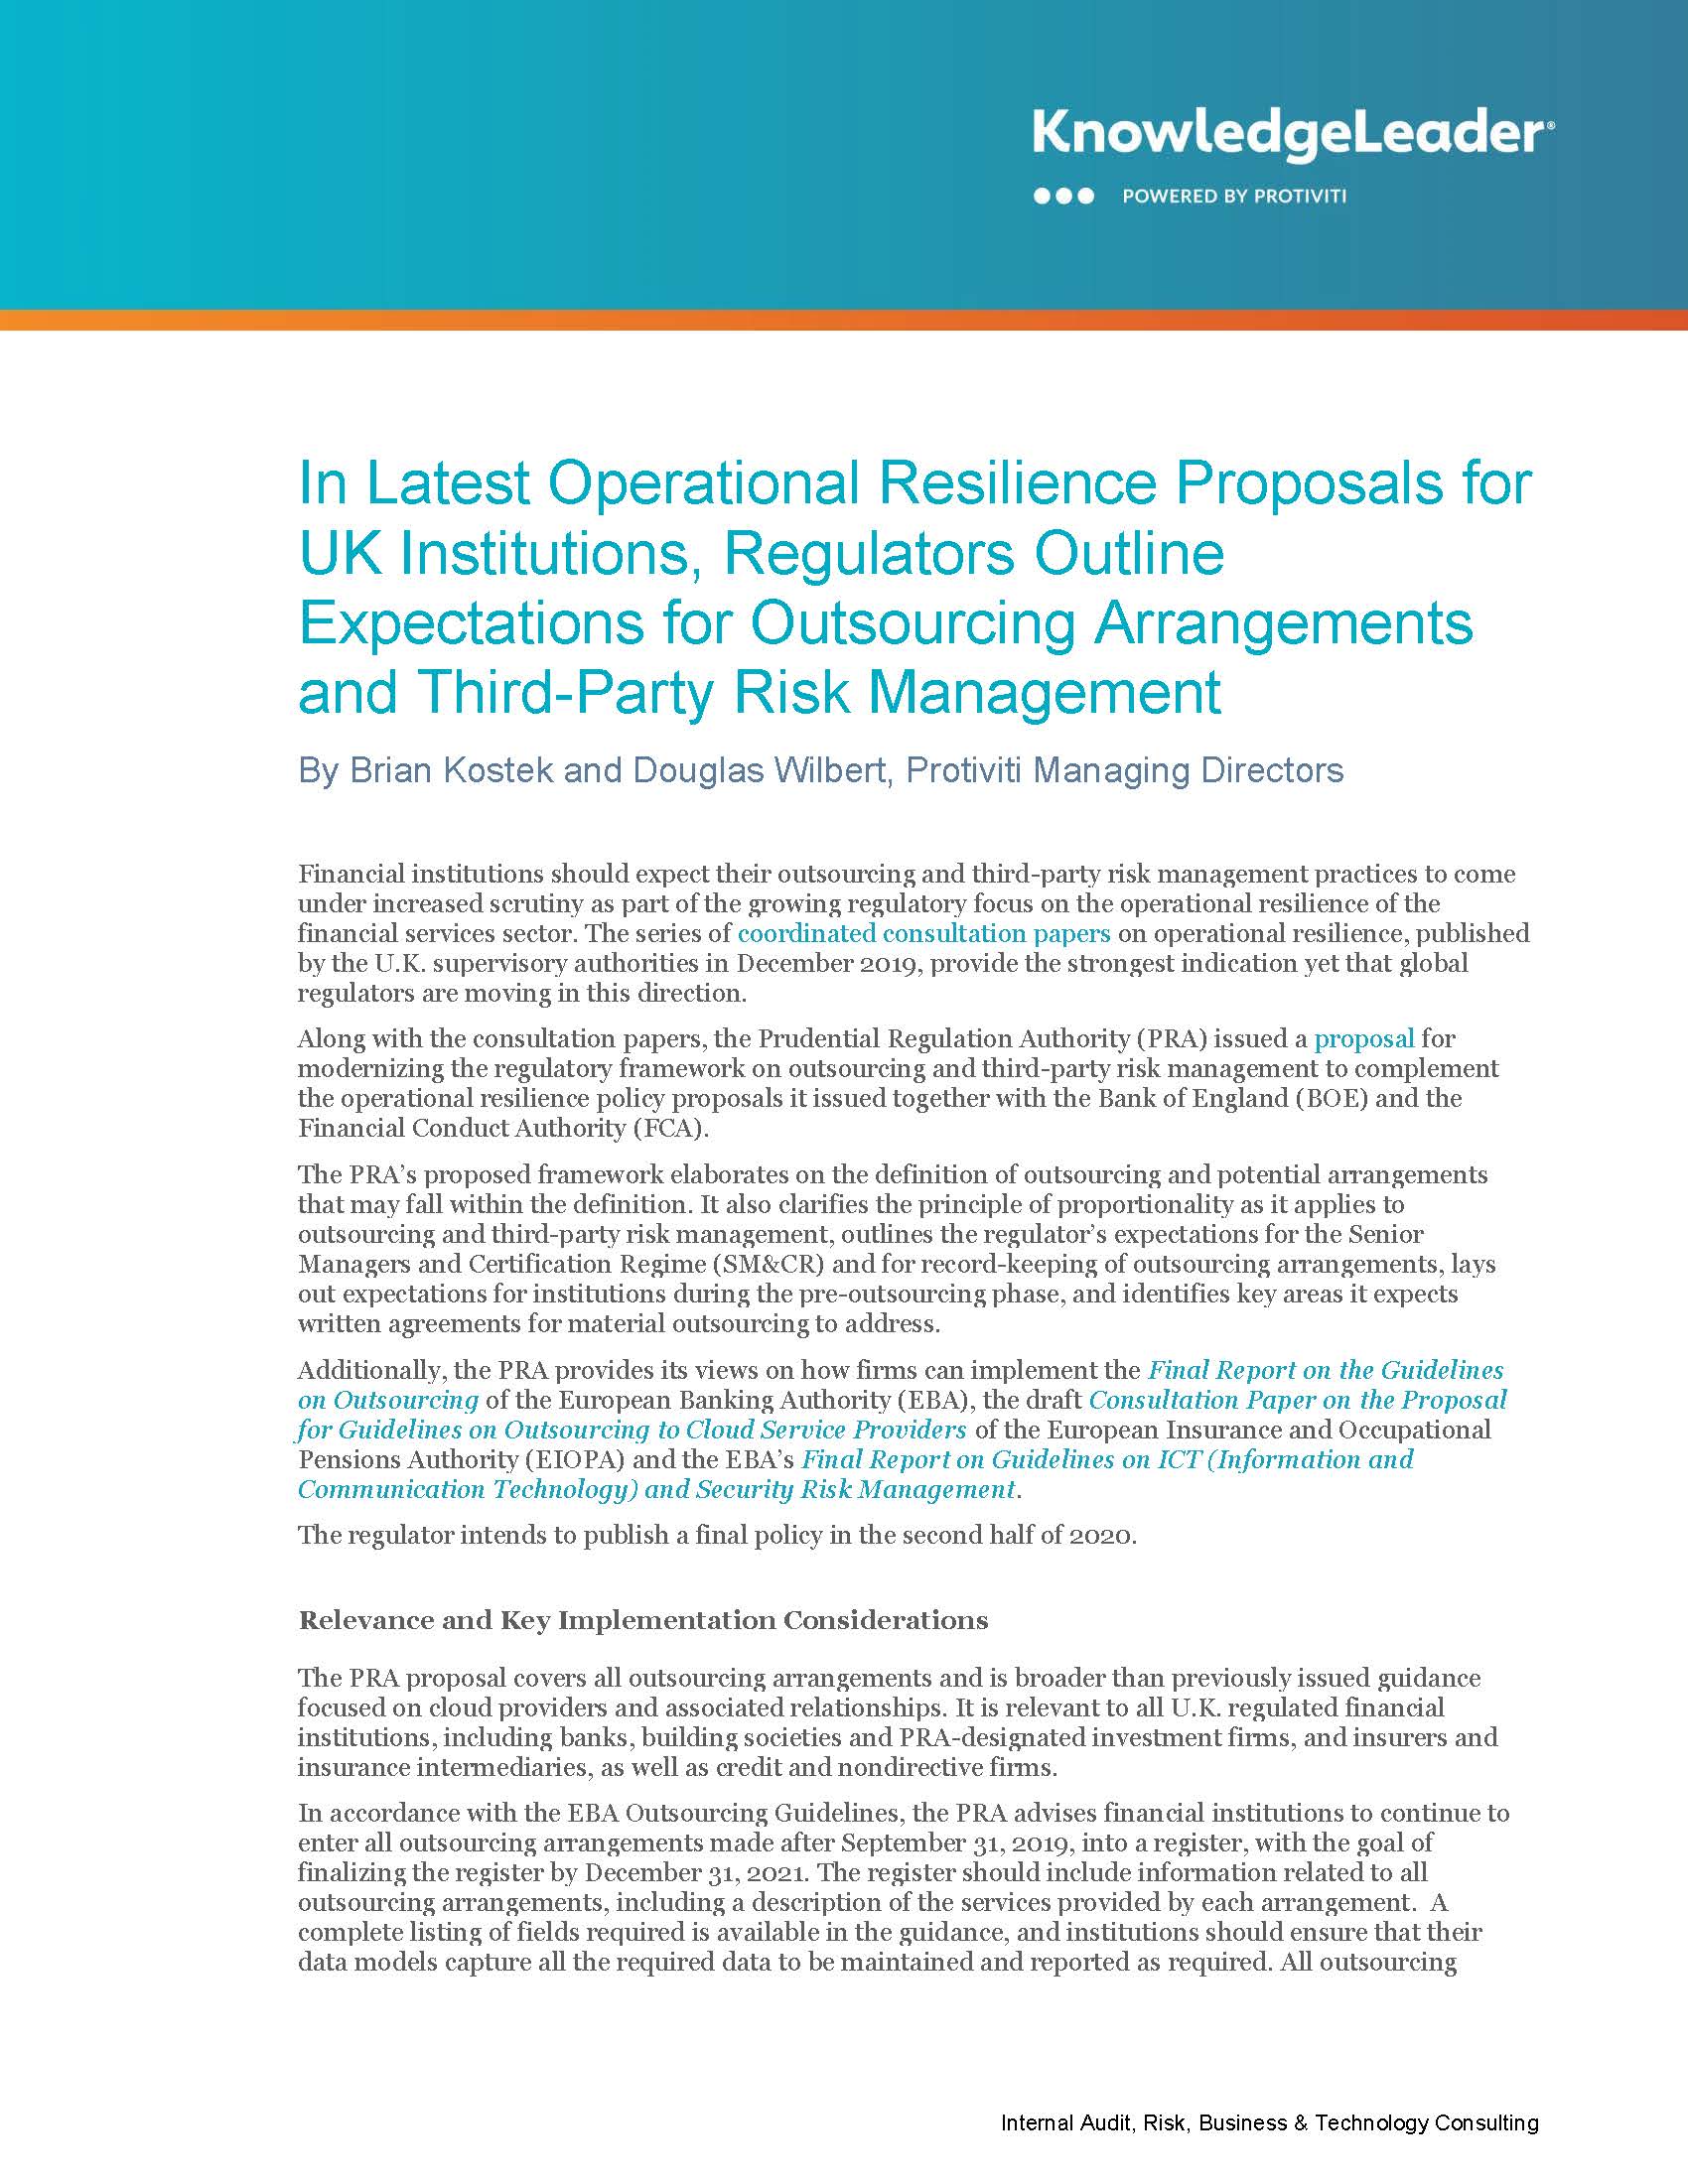 In Latest Operational Resilience Proposals for UK Institutions, Regulators Outline Expectations for Outsourcing Arrangements and Third-Party Risk Management